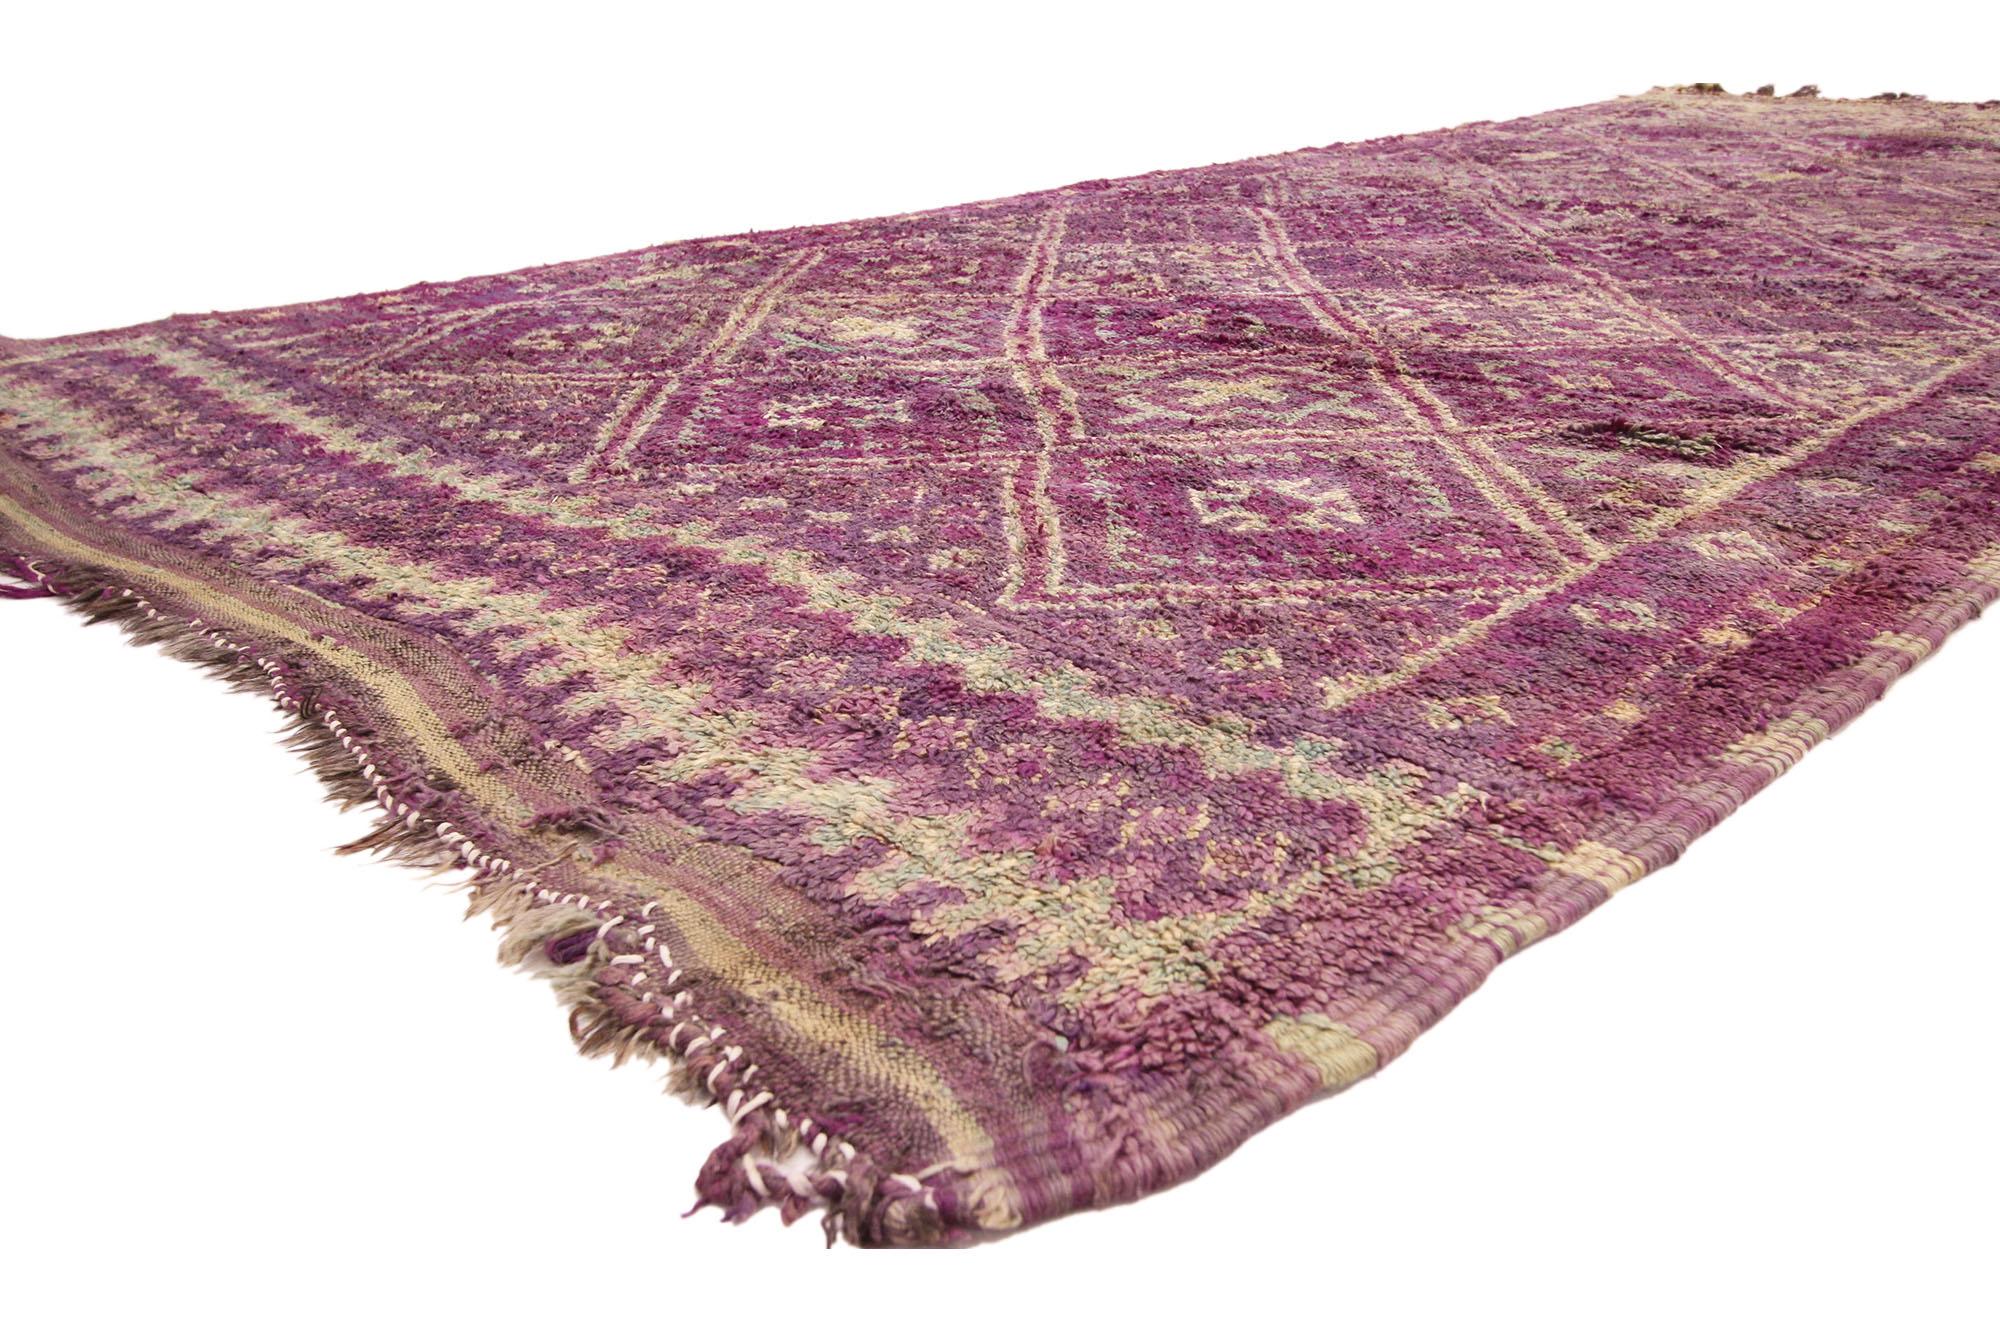 20706 Vintage Purple Beni MGuild Moroccan Rug, 06'06 x 14'07. Originating from the Beni M'Guild tribe nestled in Morocco's Middle Atlas Mountains, Beni M'Guild rugs embody a cherished tradition meticulously honed by skilled Berber women. These rugs